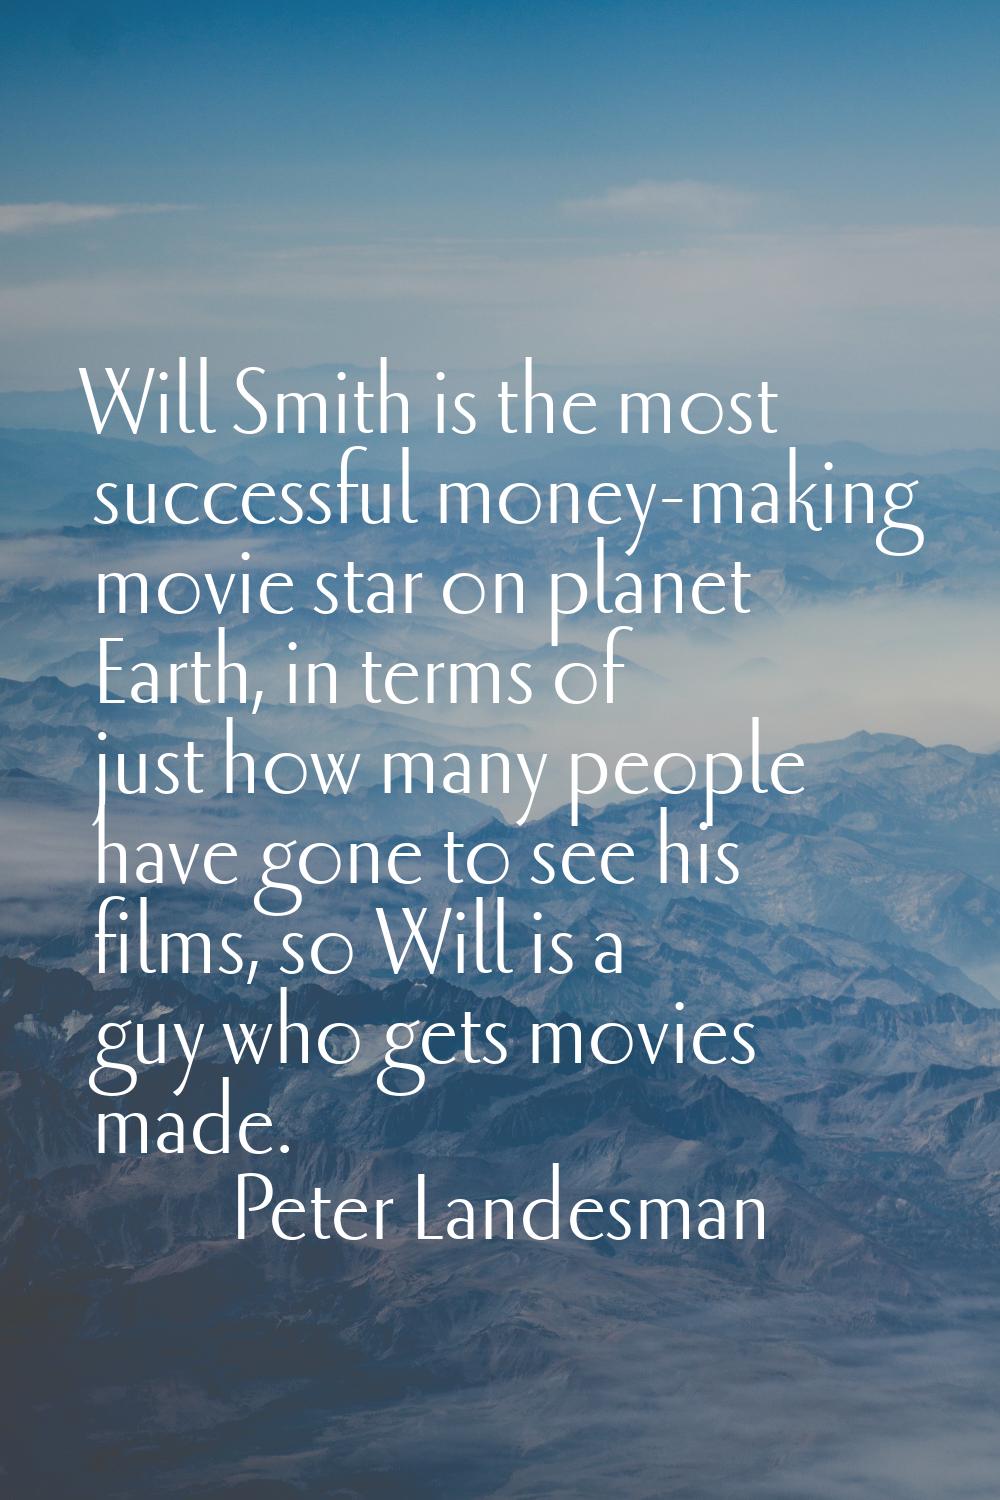 Will Smith is the most successful money-making movie star on planet Earth, in terms of just how man